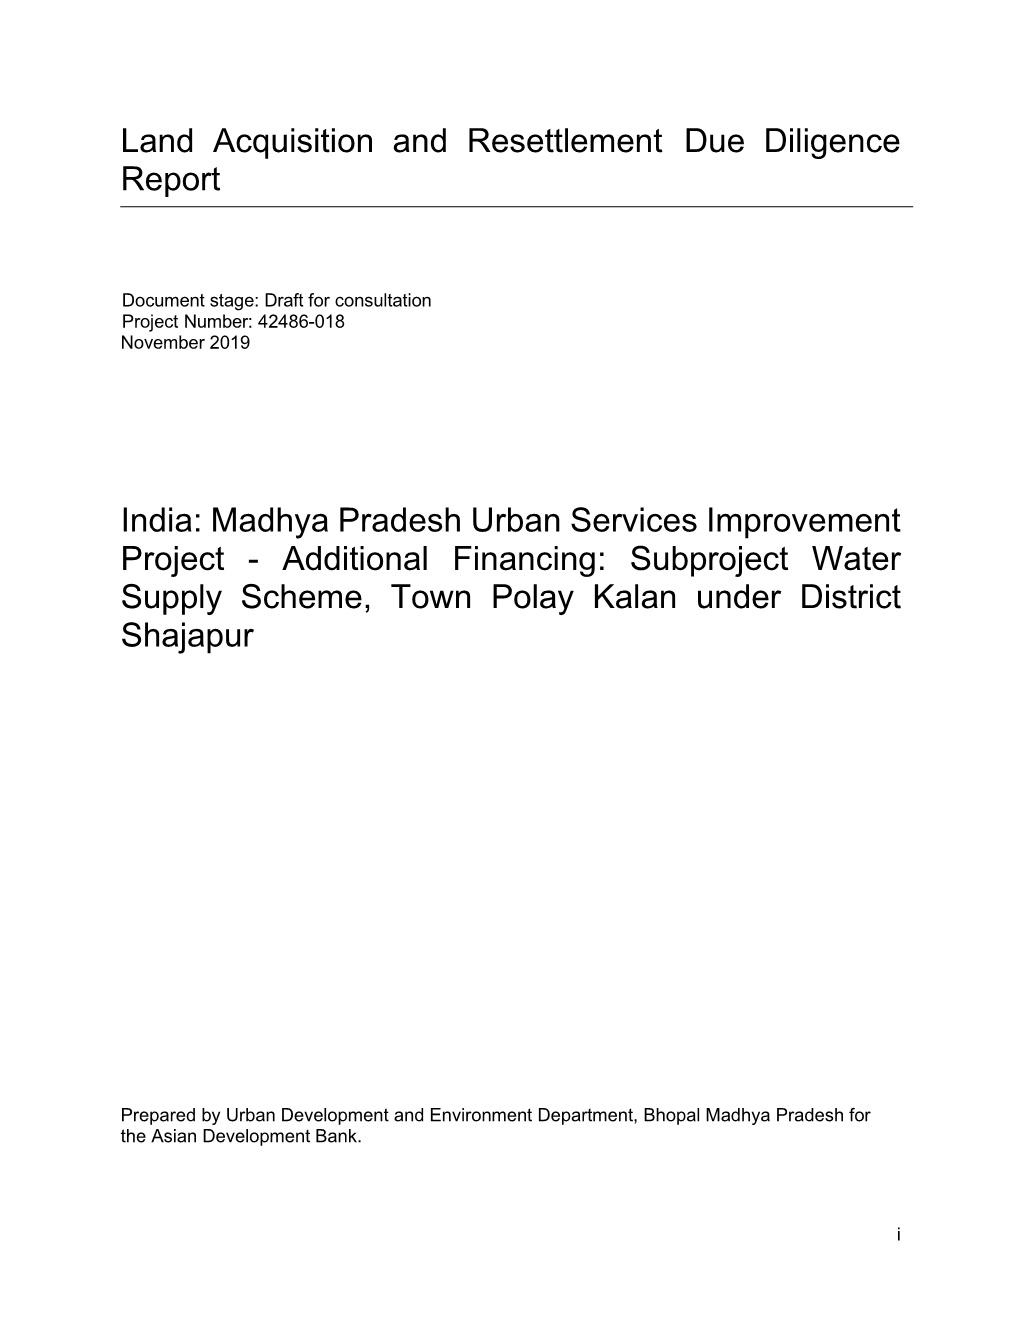 Land Acquisition and Resettlement Due Diligence Report India